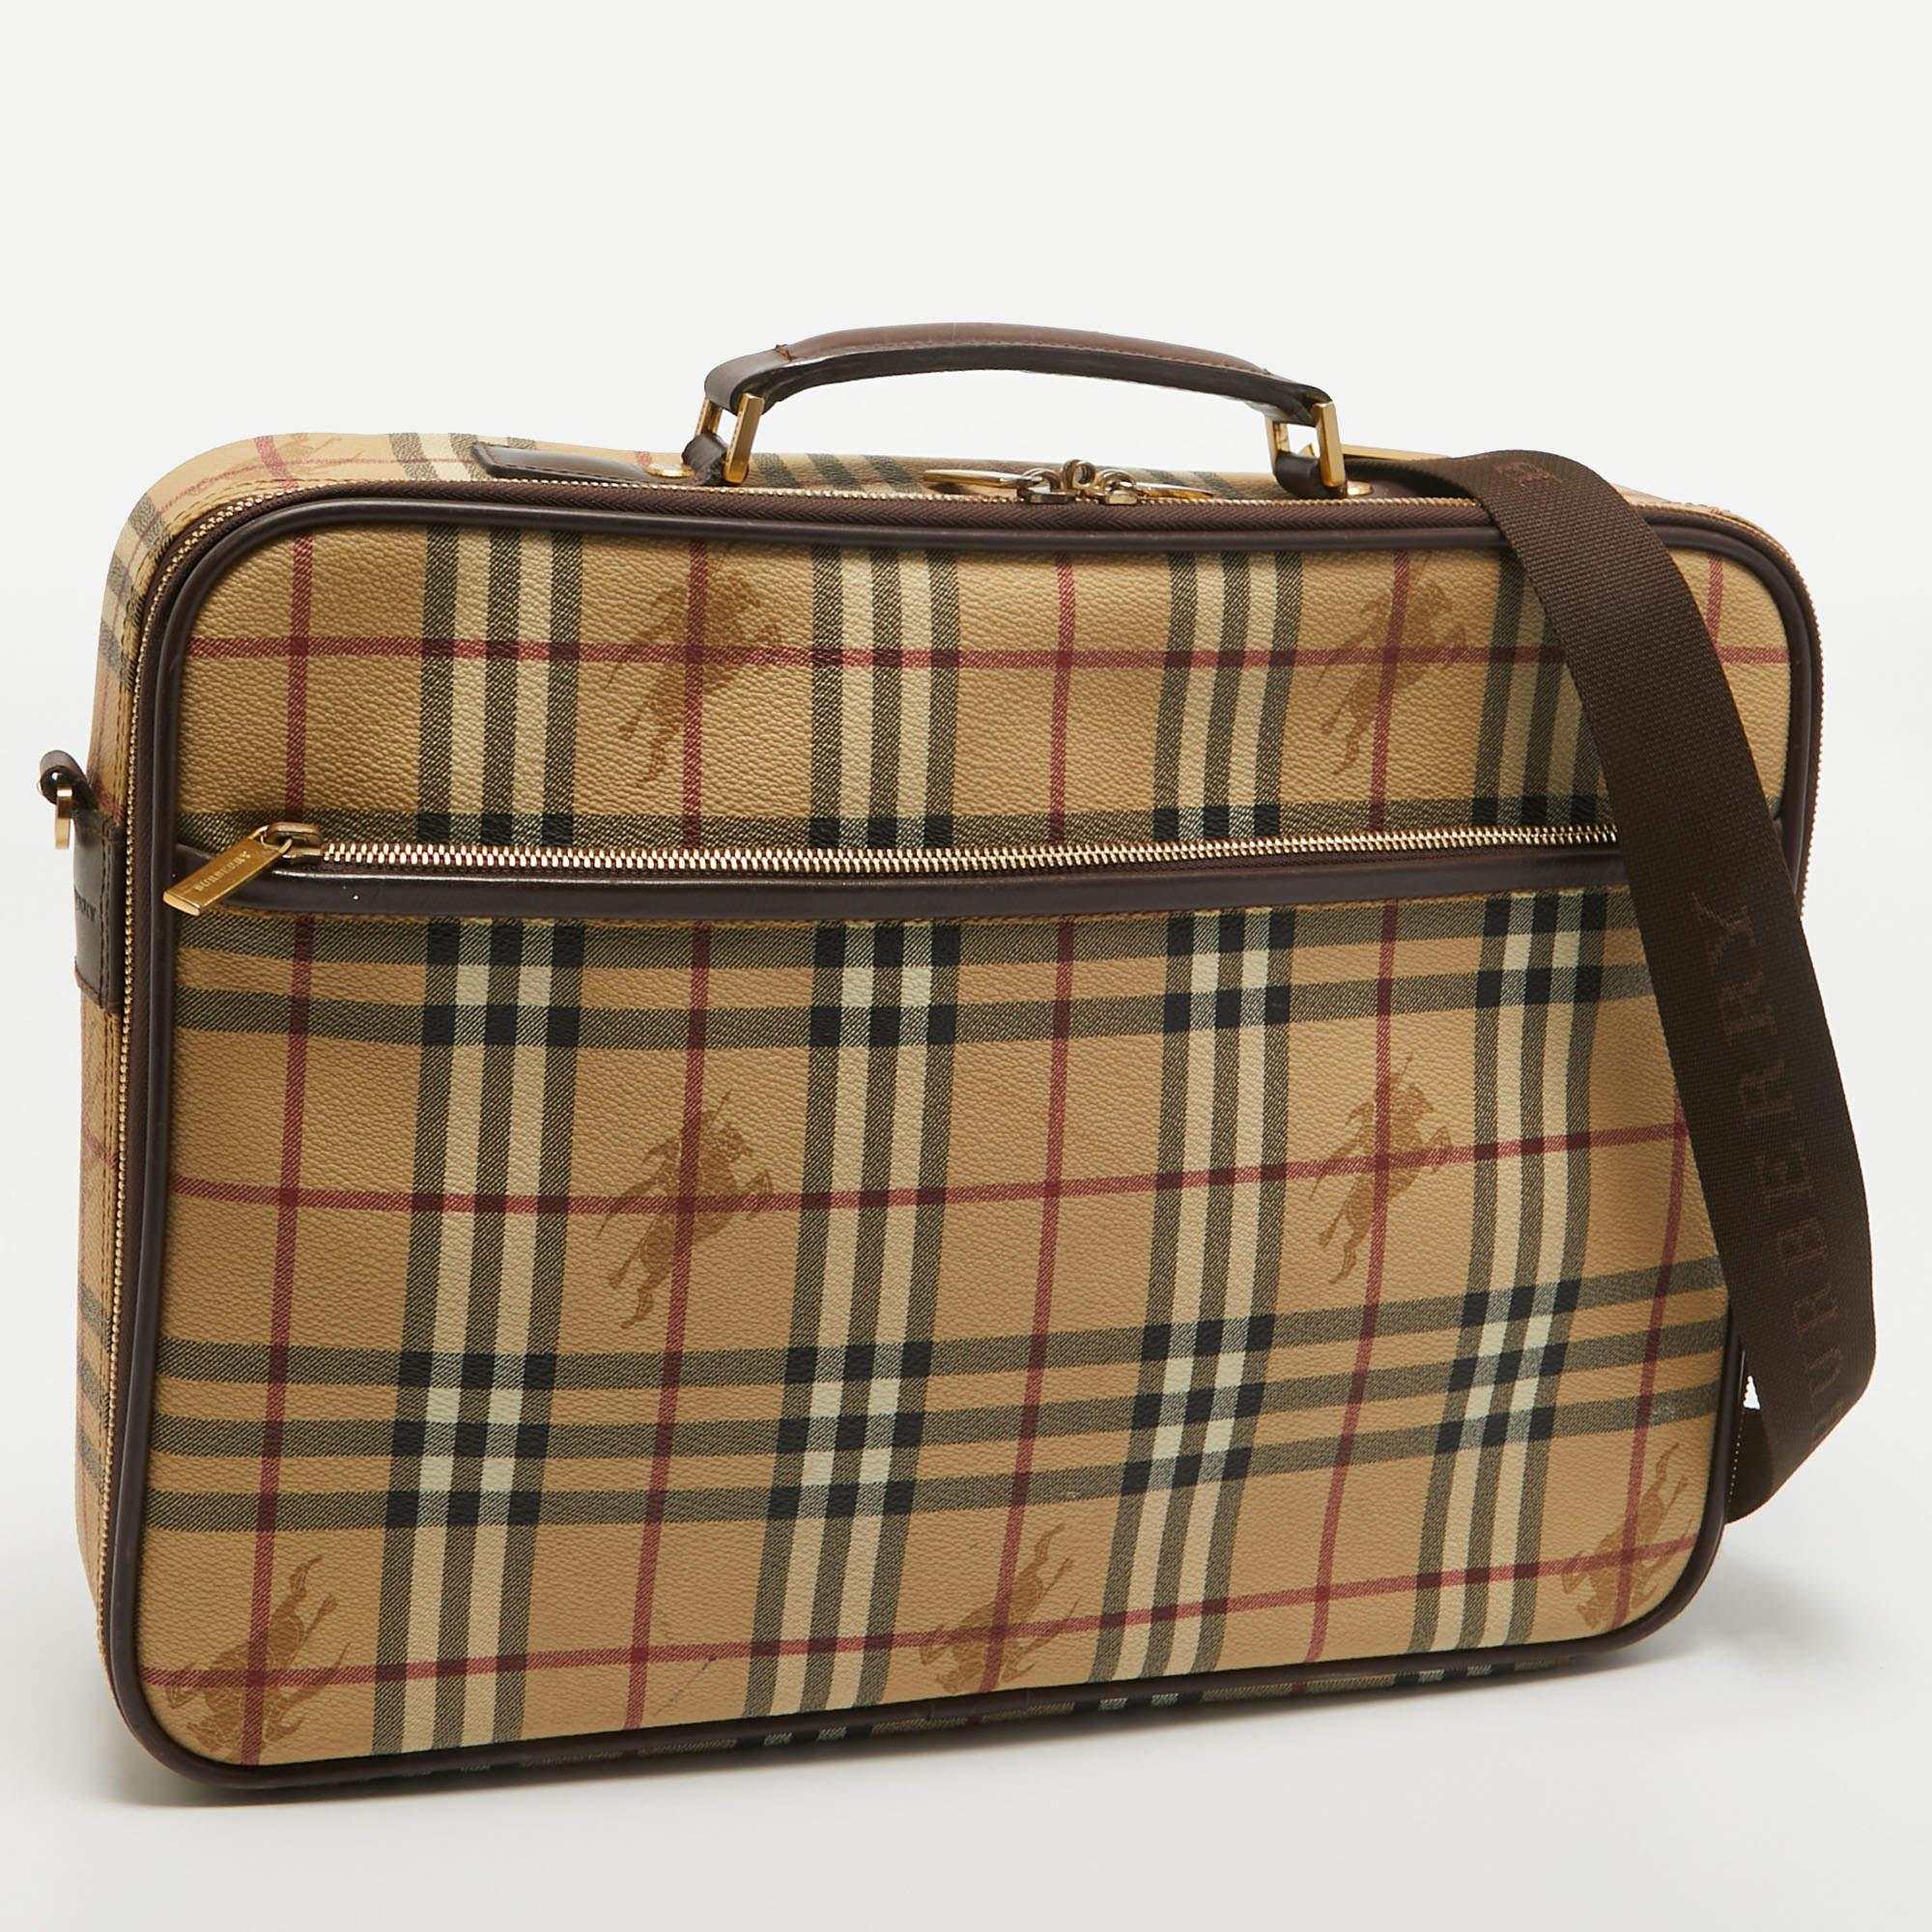 The Burberry briefcase is a sophisticated accessory featuring the iconic Burberry check pattern on durable coated canvas. With a timeless beige color, leather trims, and a spacious interior, this briefcase seamlessly combines style and